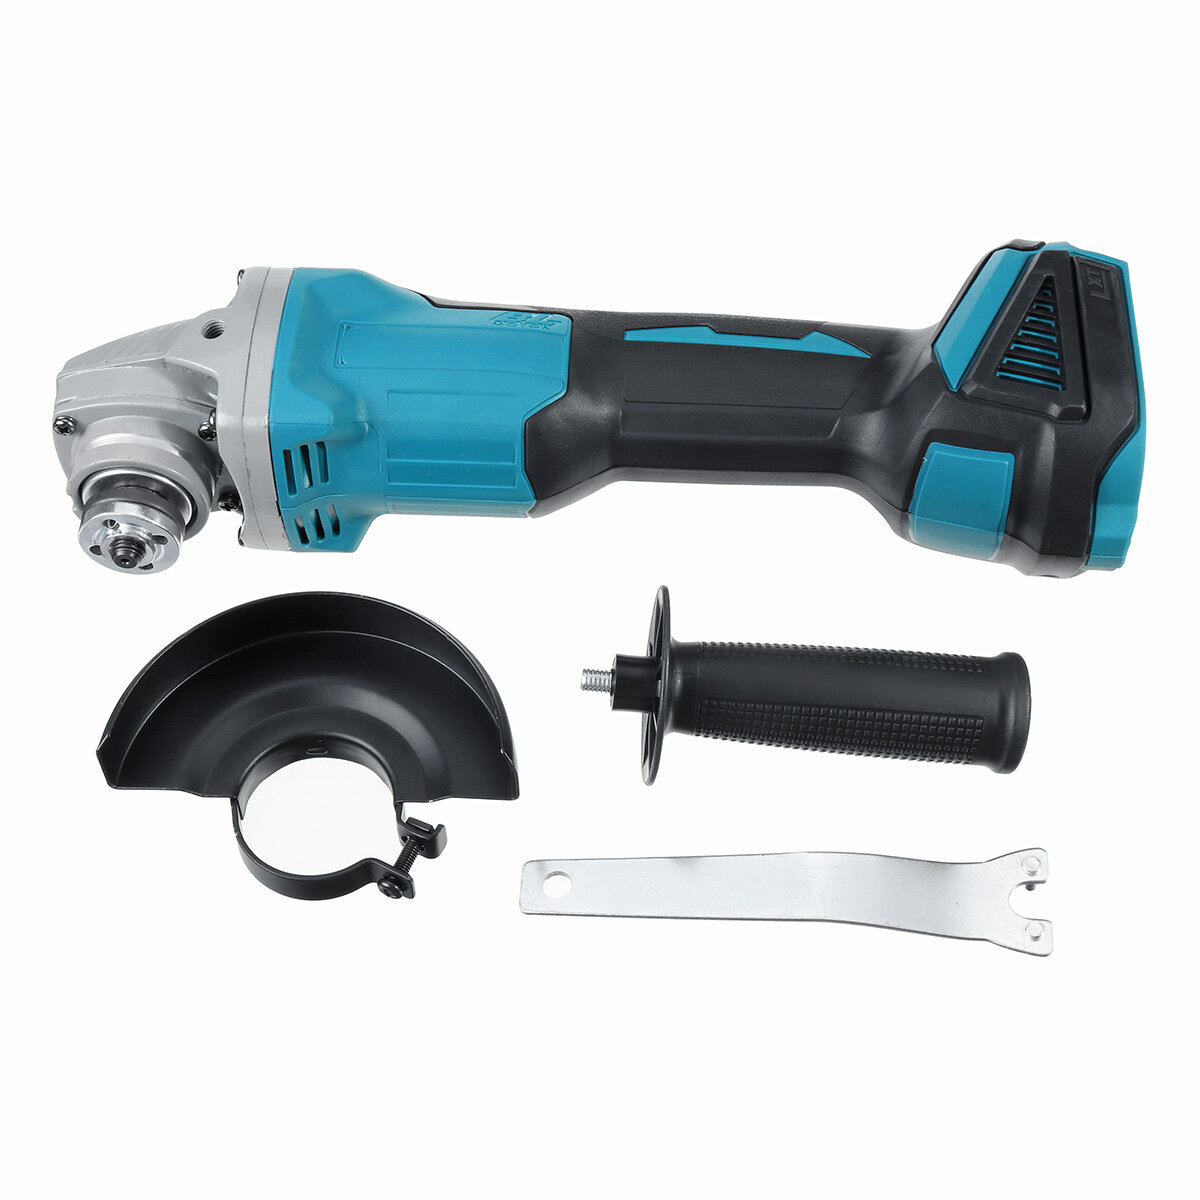 Drillpro 18V 800W 125mm Cordless Brushless Angle Grinder For Makita Battery Electric Grinding Polishing Cutting Machine